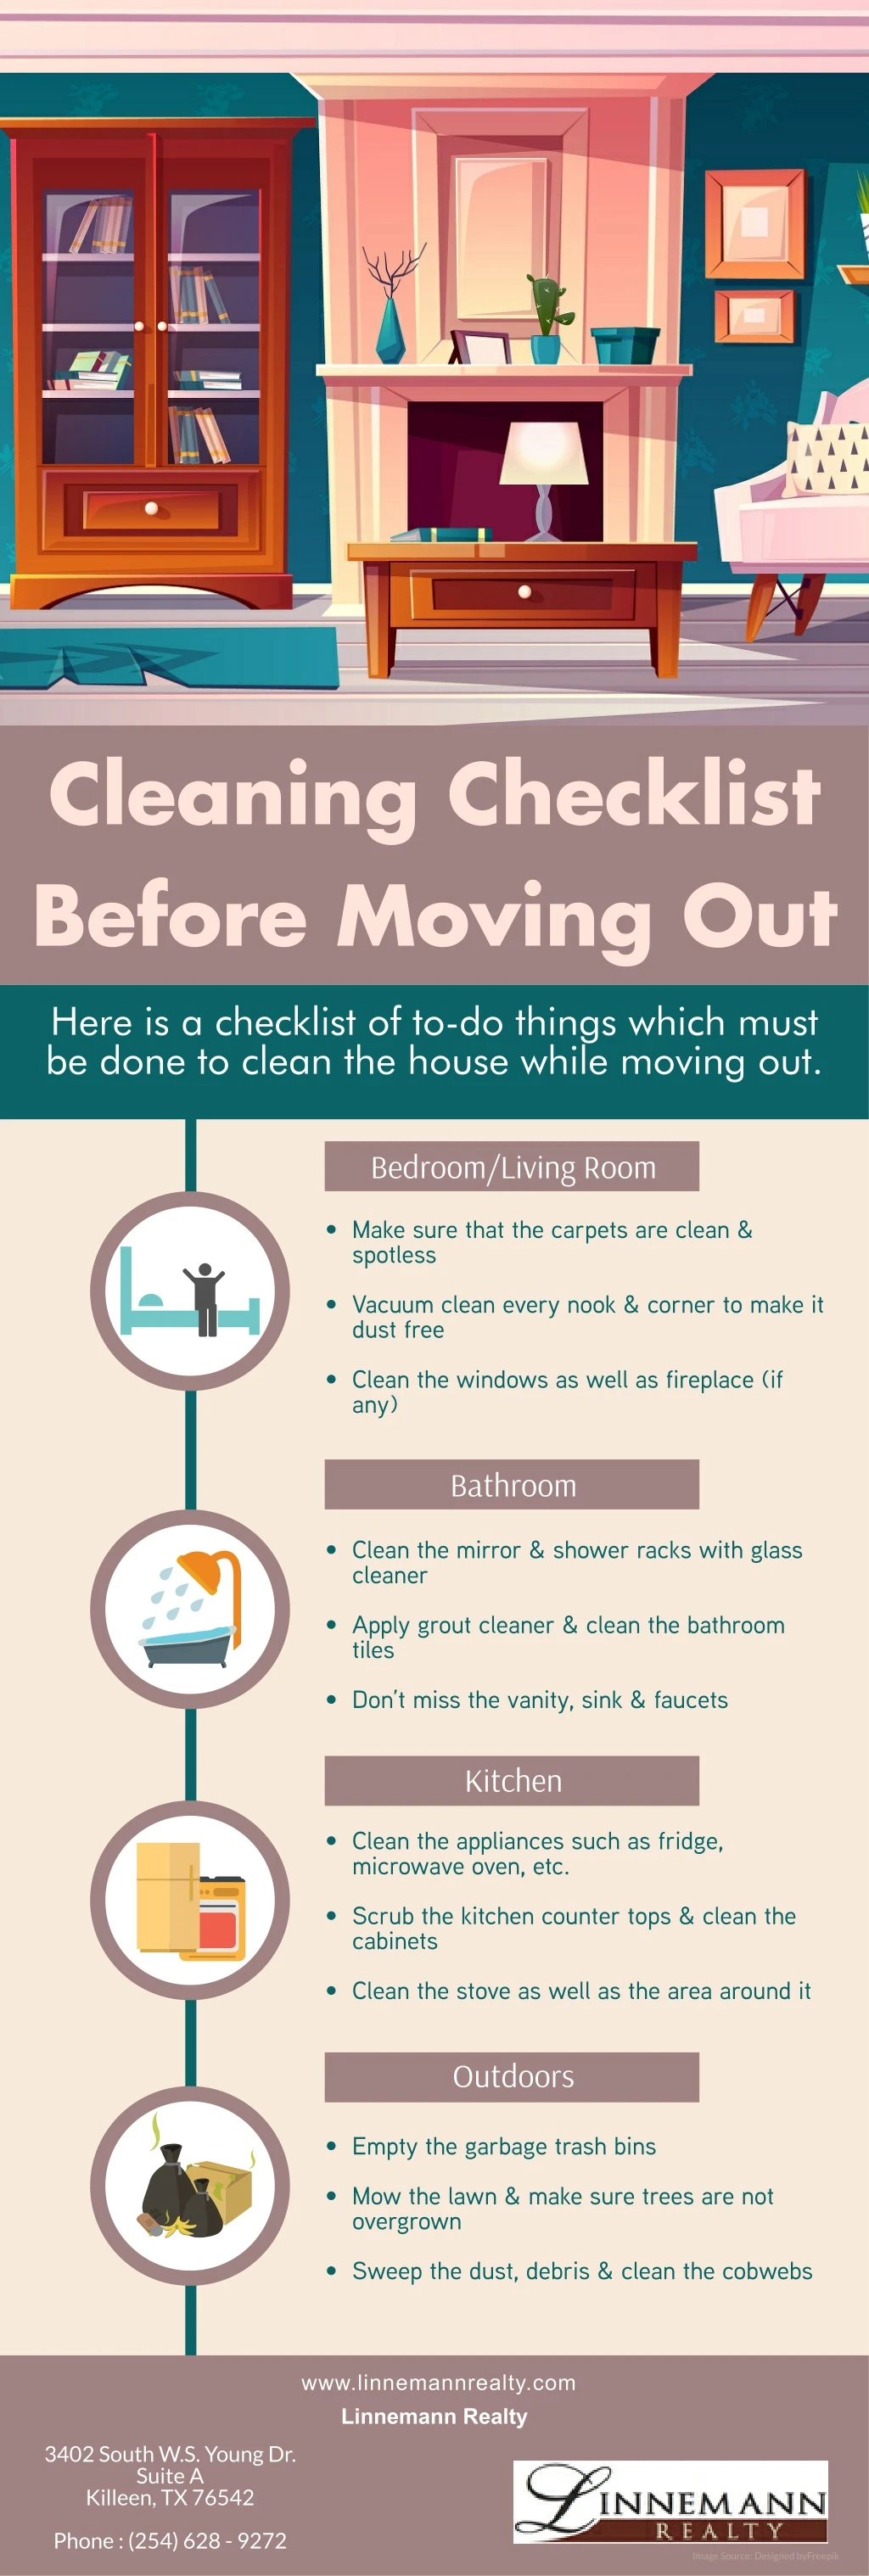 cleaning checklist before moving out